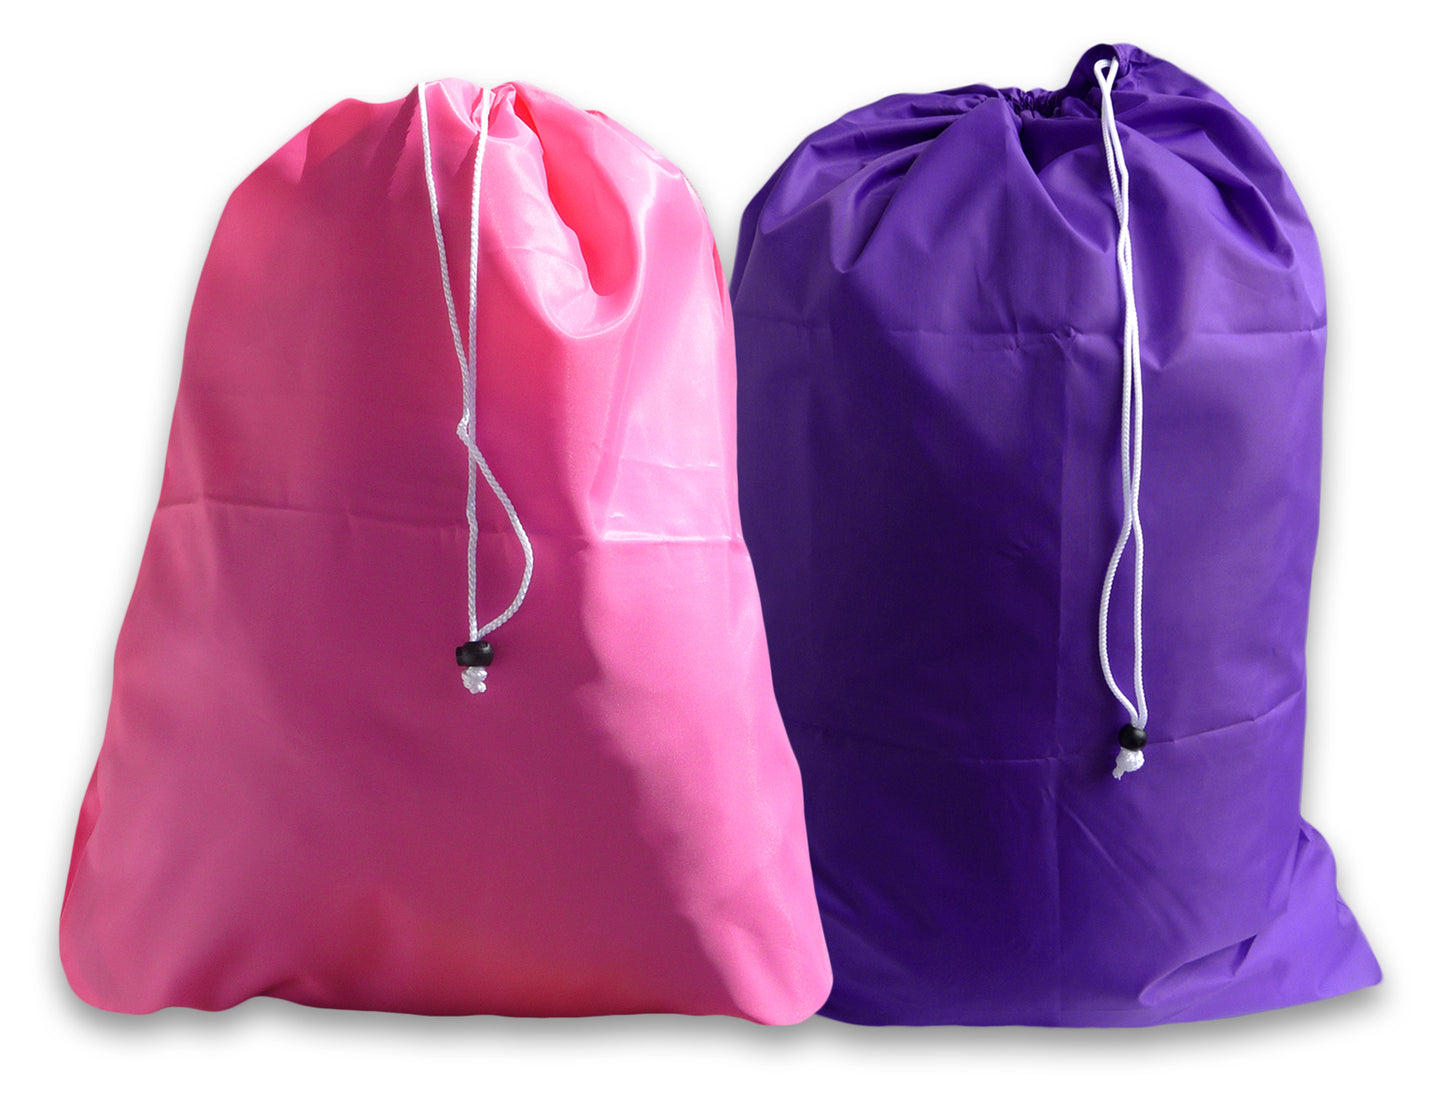 Extra Large Laundry Bags, Neon Pink, Purple, 2 Pack